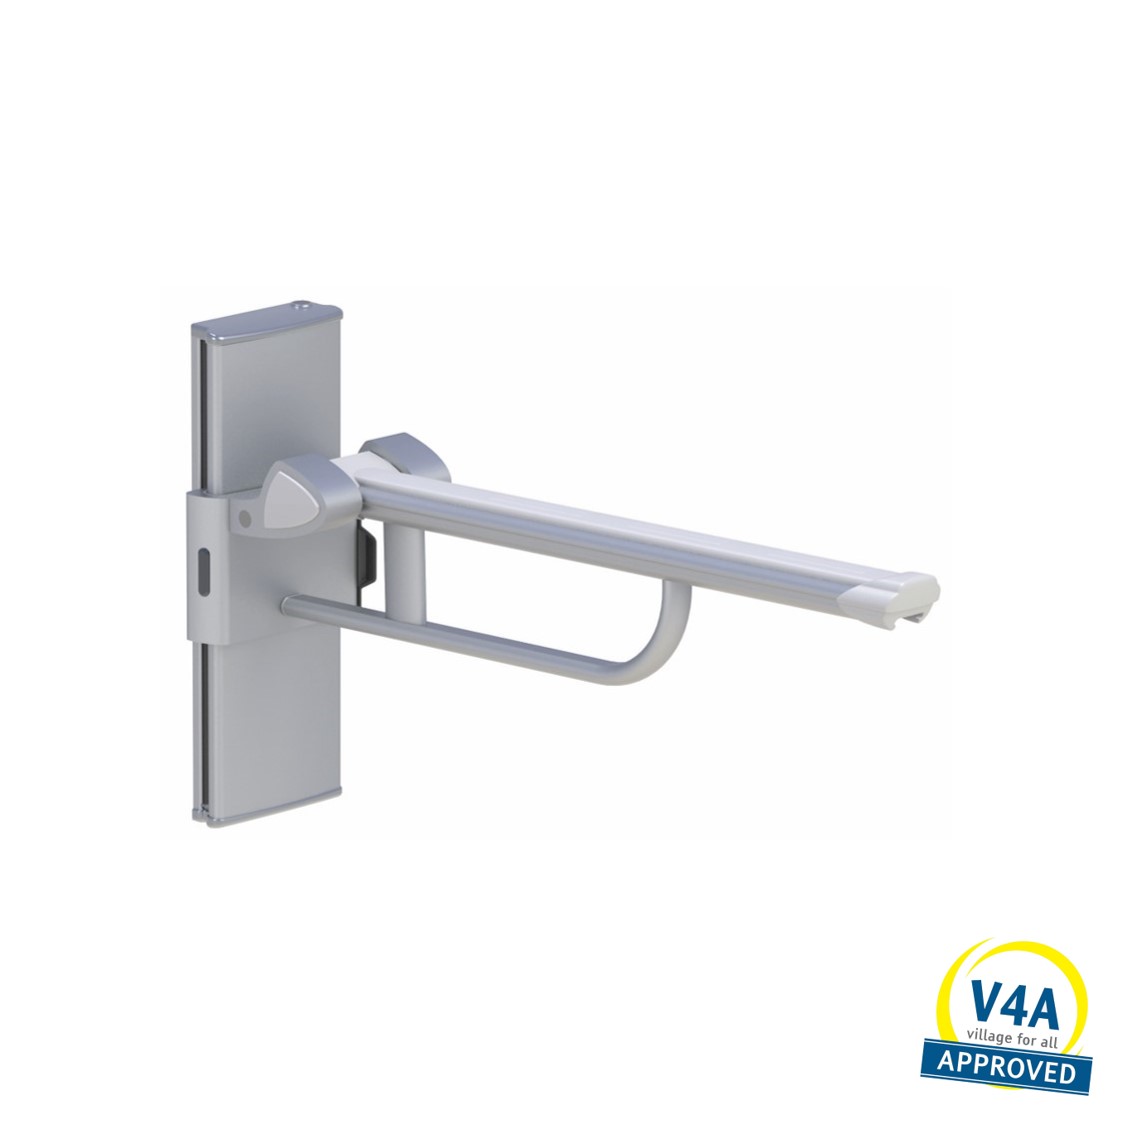 Wall mounted lift-up arm support height adjustable